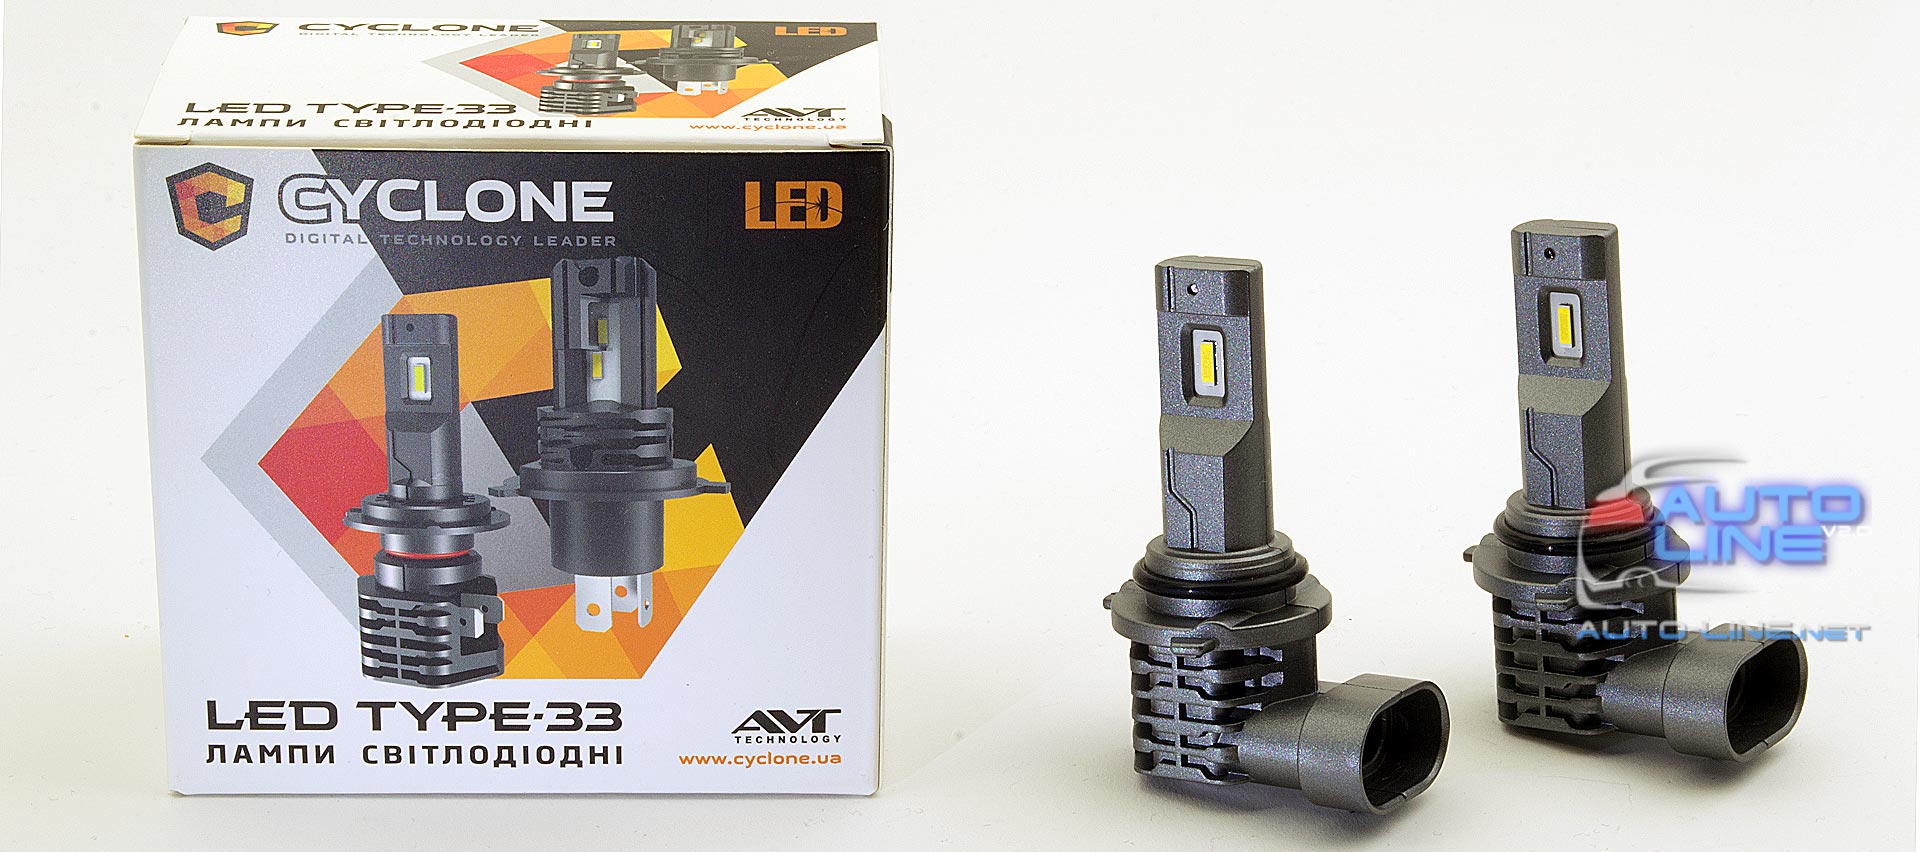 Cyclone LED H11 5000K 4800Lm type 33 photo 1